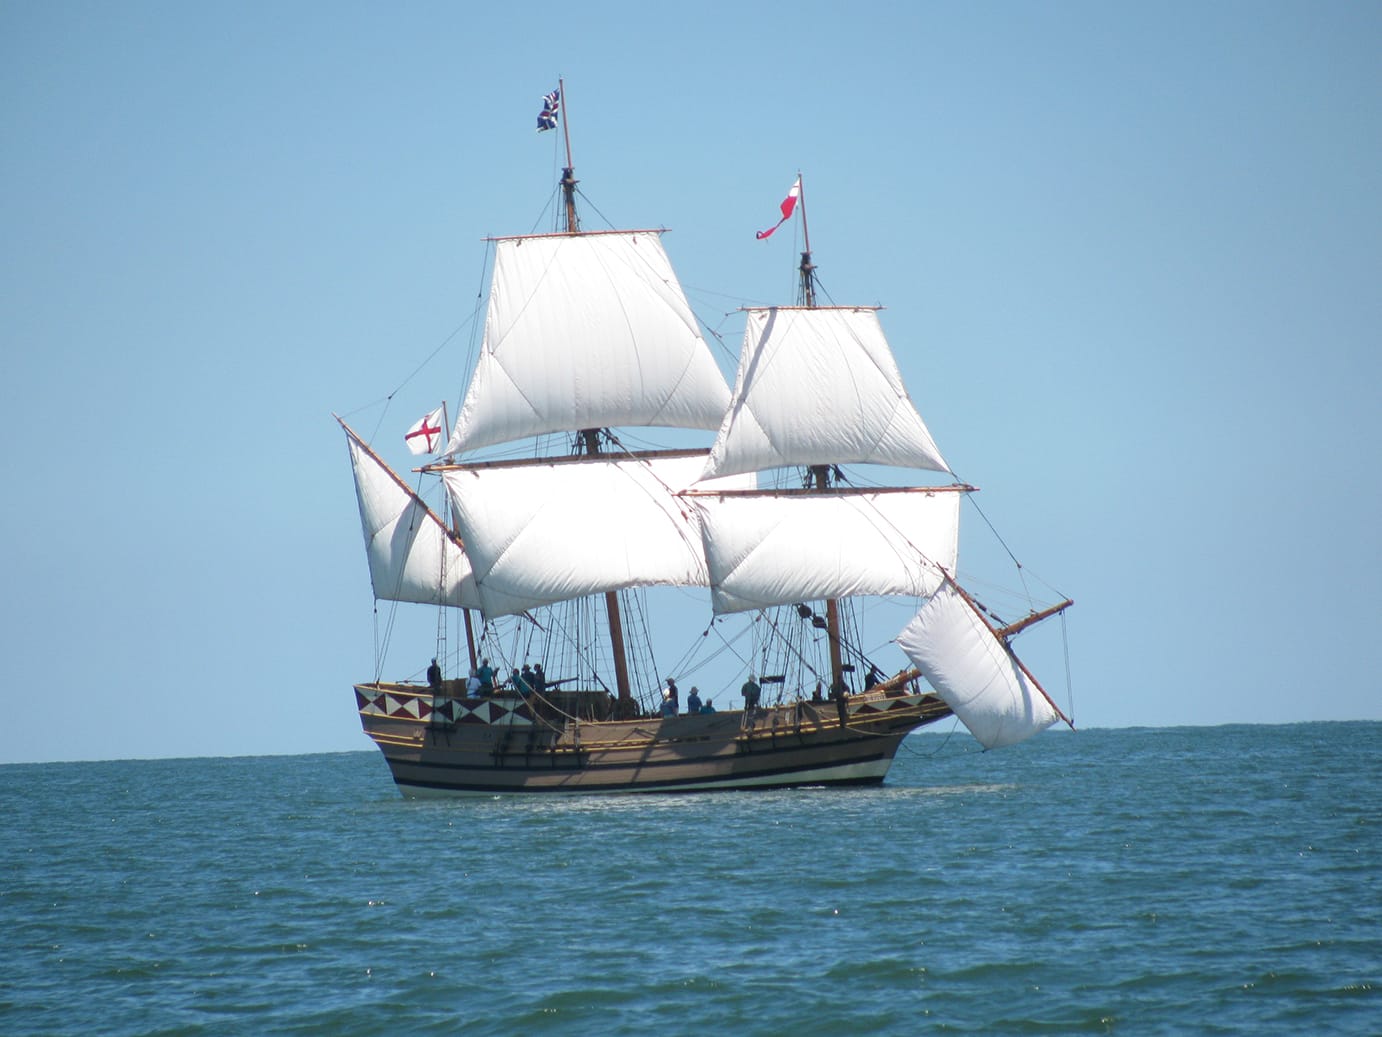 godspeed-this-is-a-replica-of-the-ships-that-brouht-our-ancestors-to-jamestown-in-1607.jpg